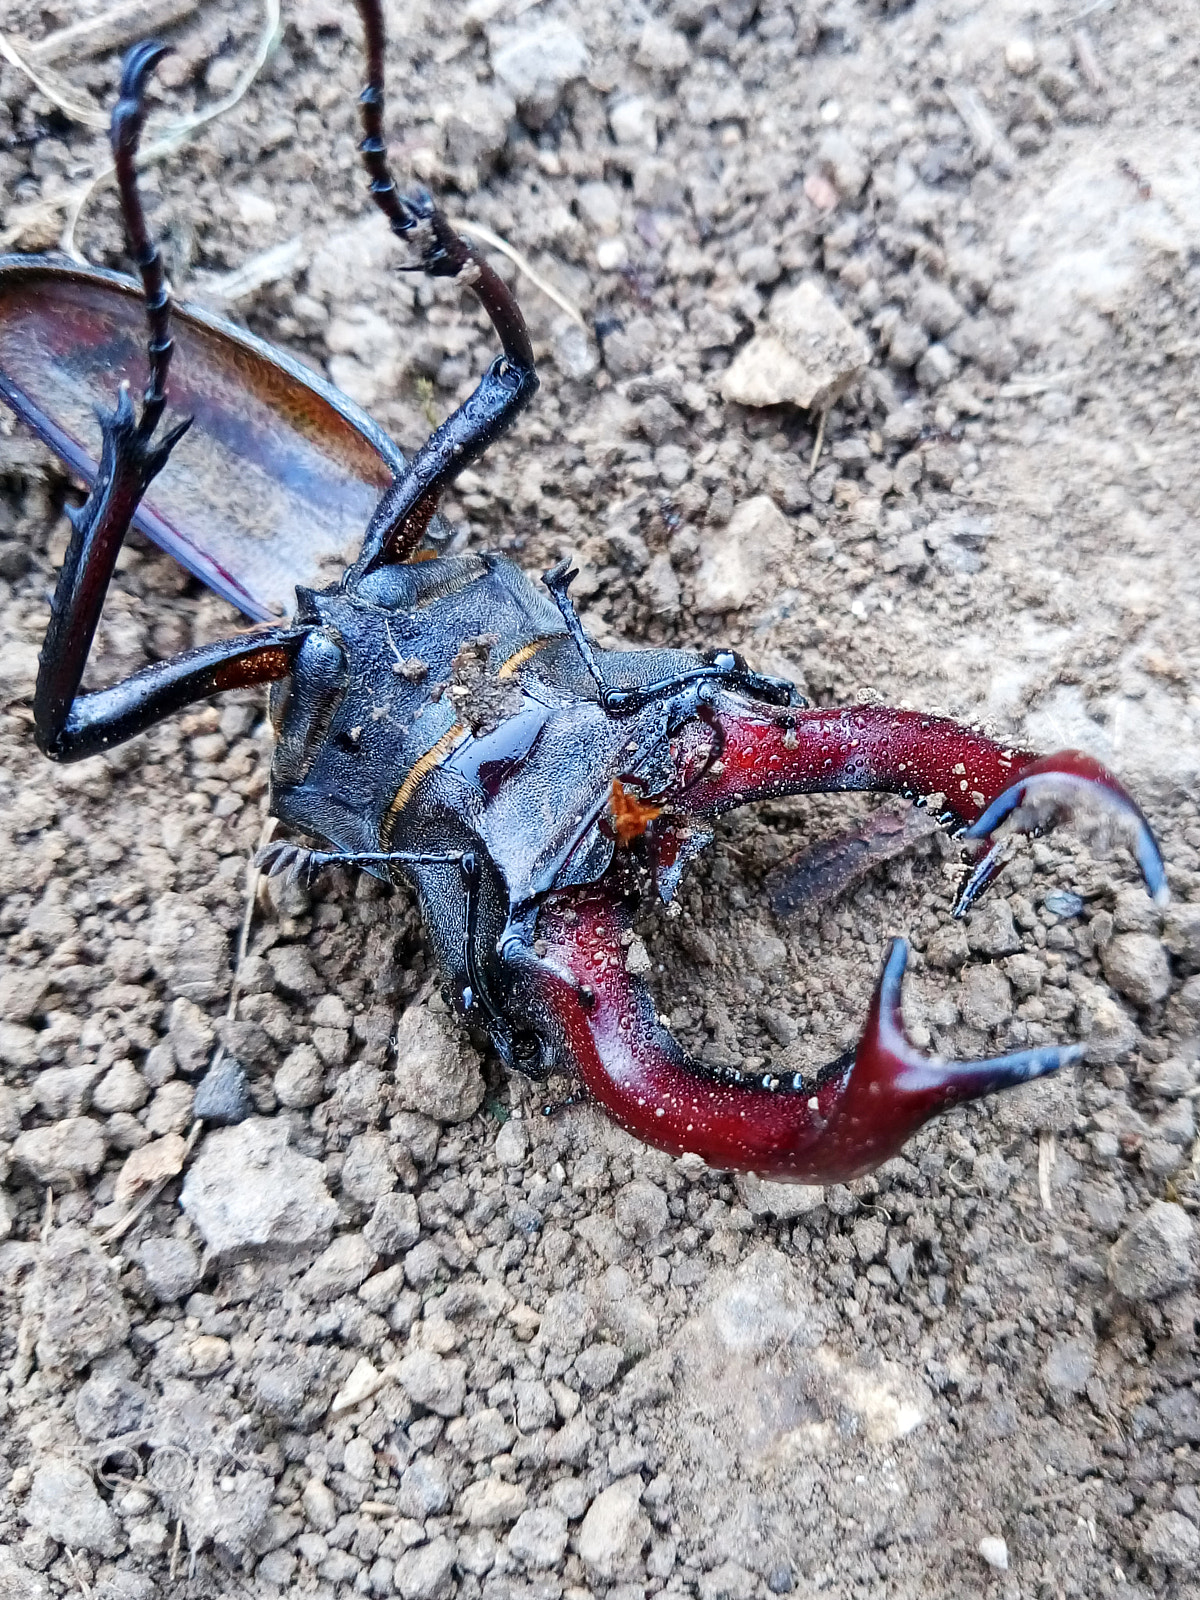 Meizu M6 sample photo. A stag-beetle killer is on the loose photography